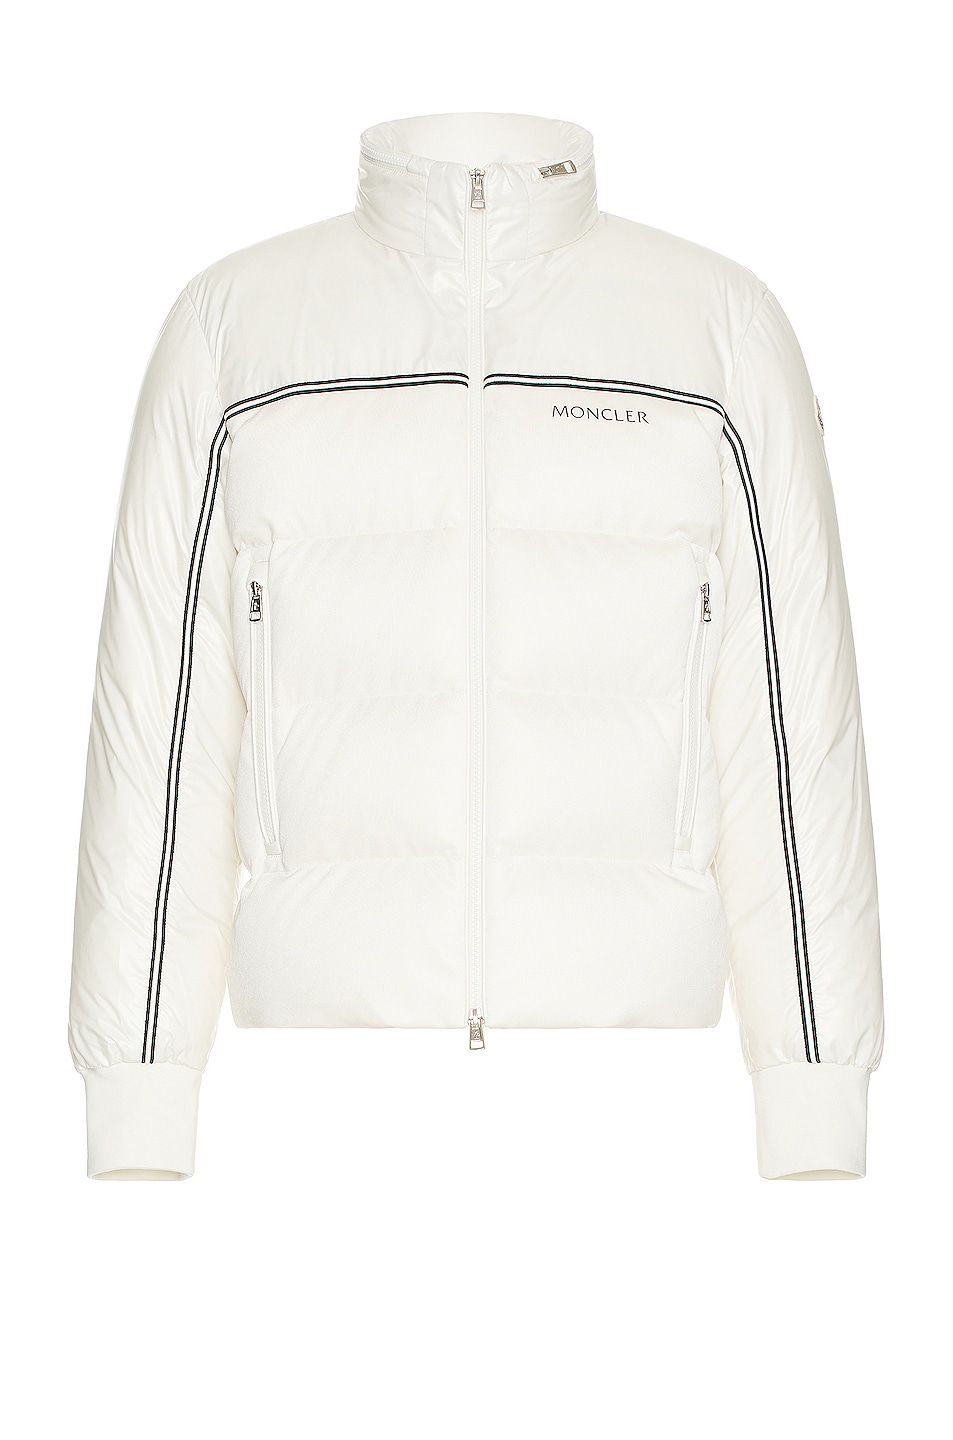 Image 1 of Moncler Michael Jacket in White